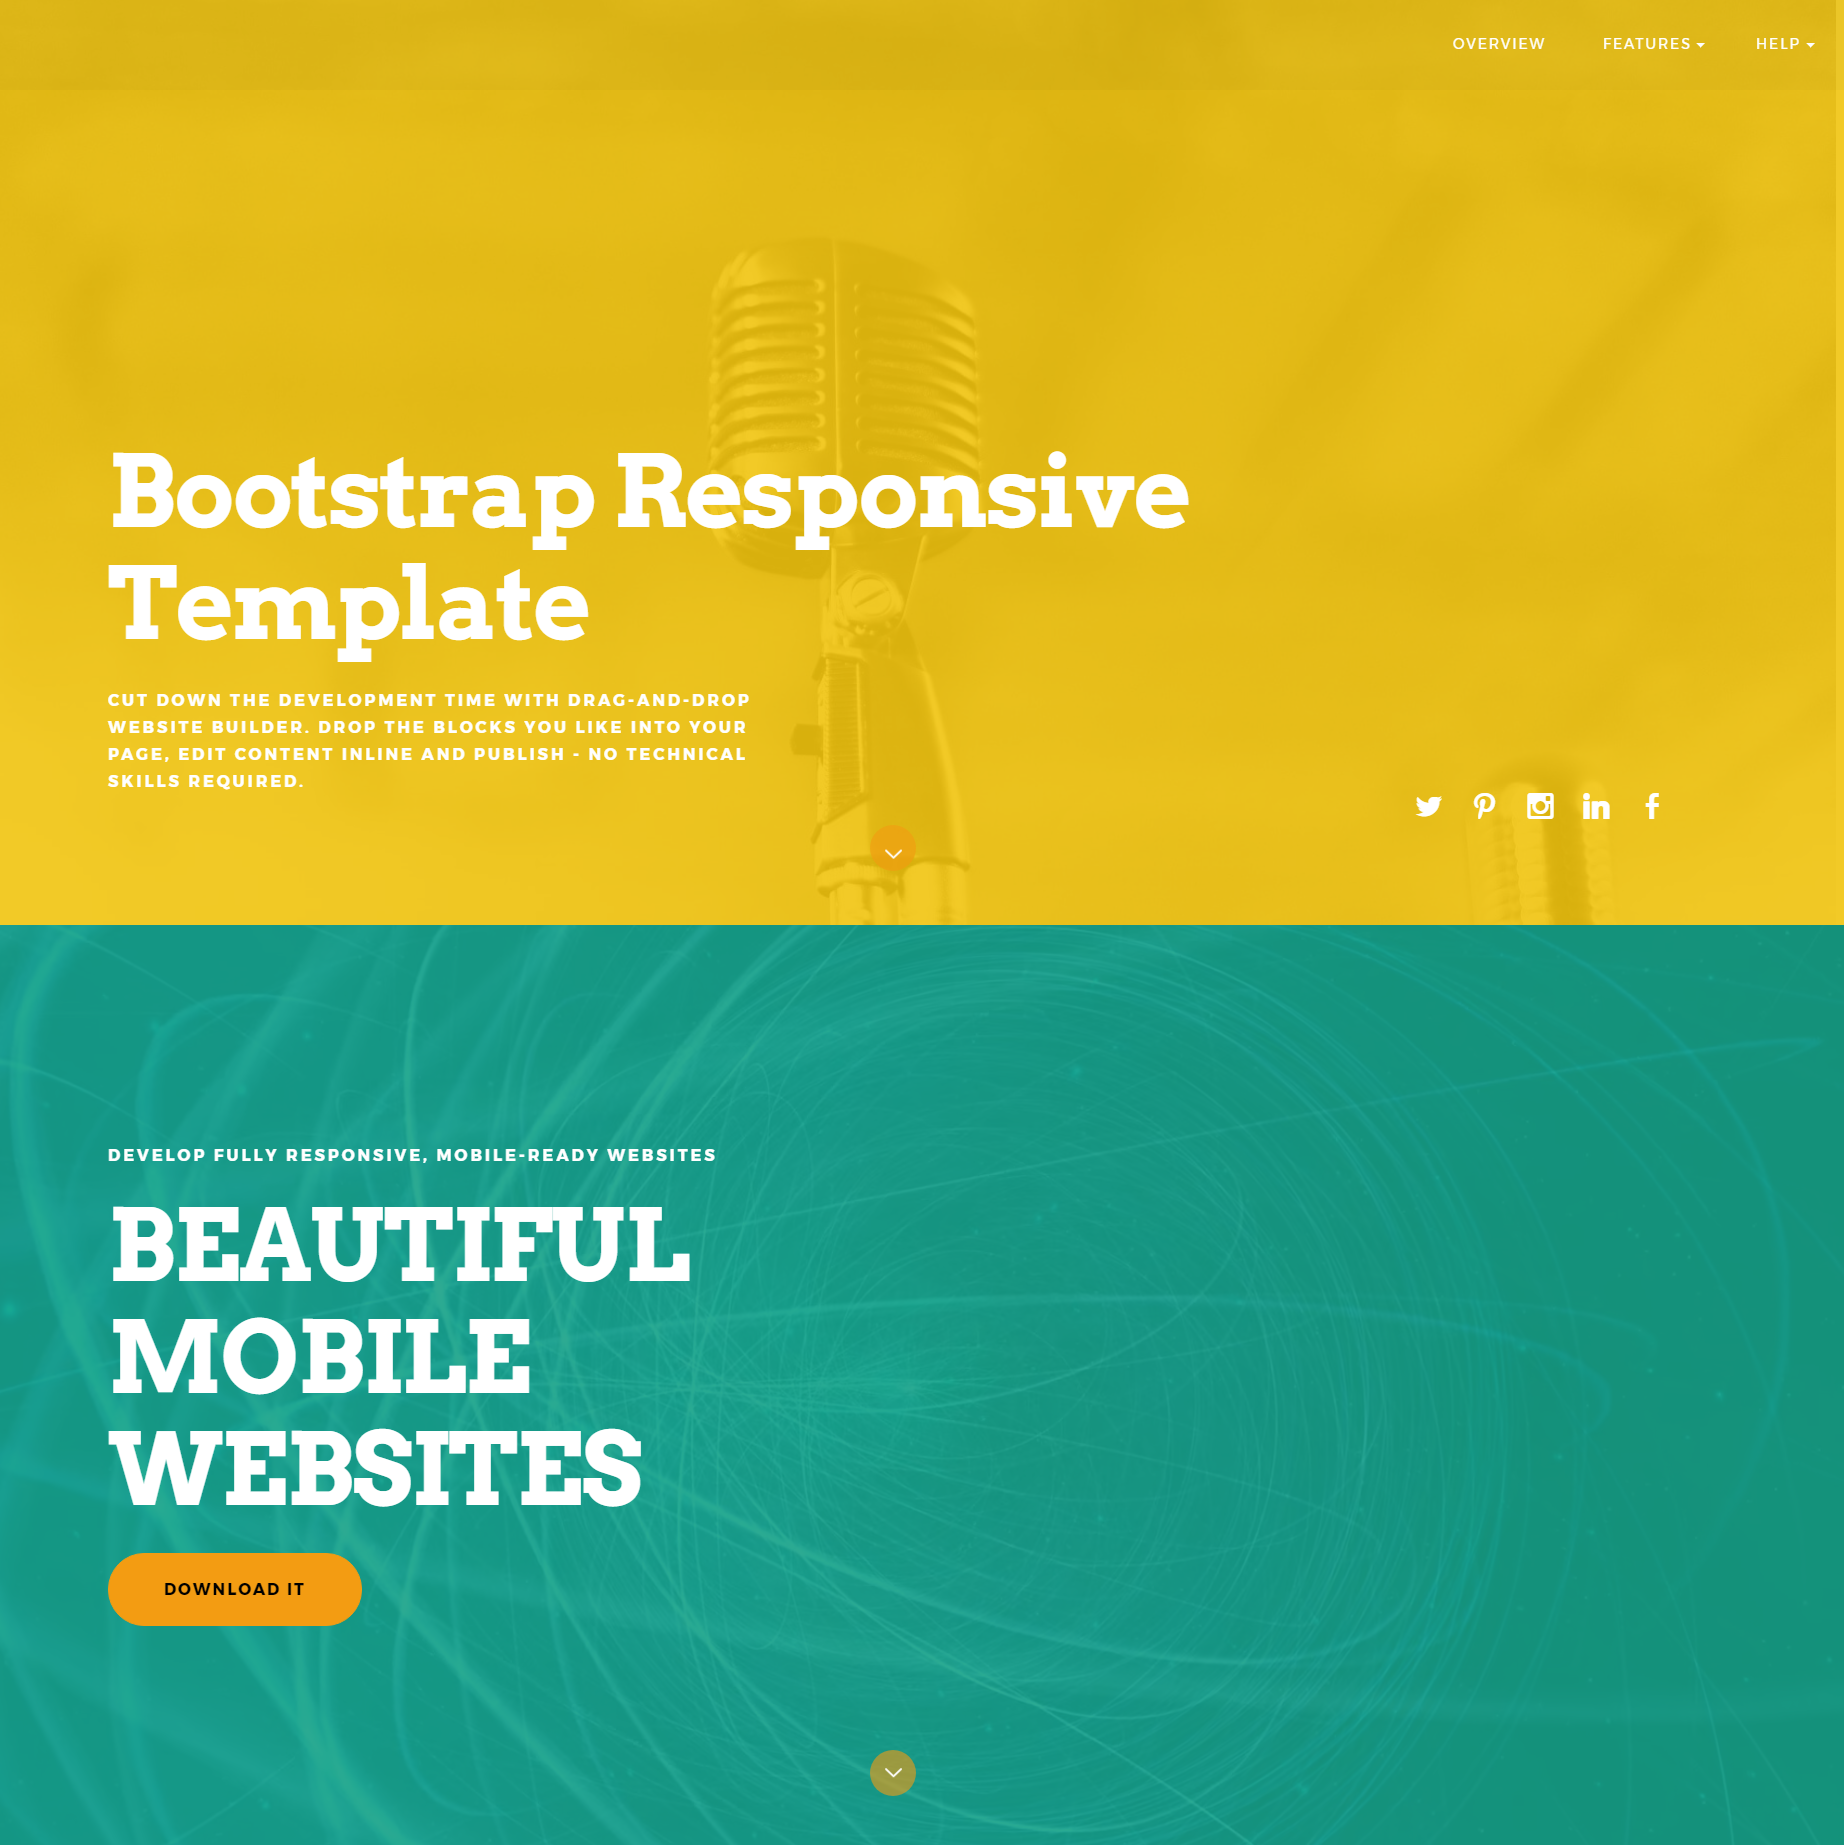 Free Bootstrap ColorM Templates